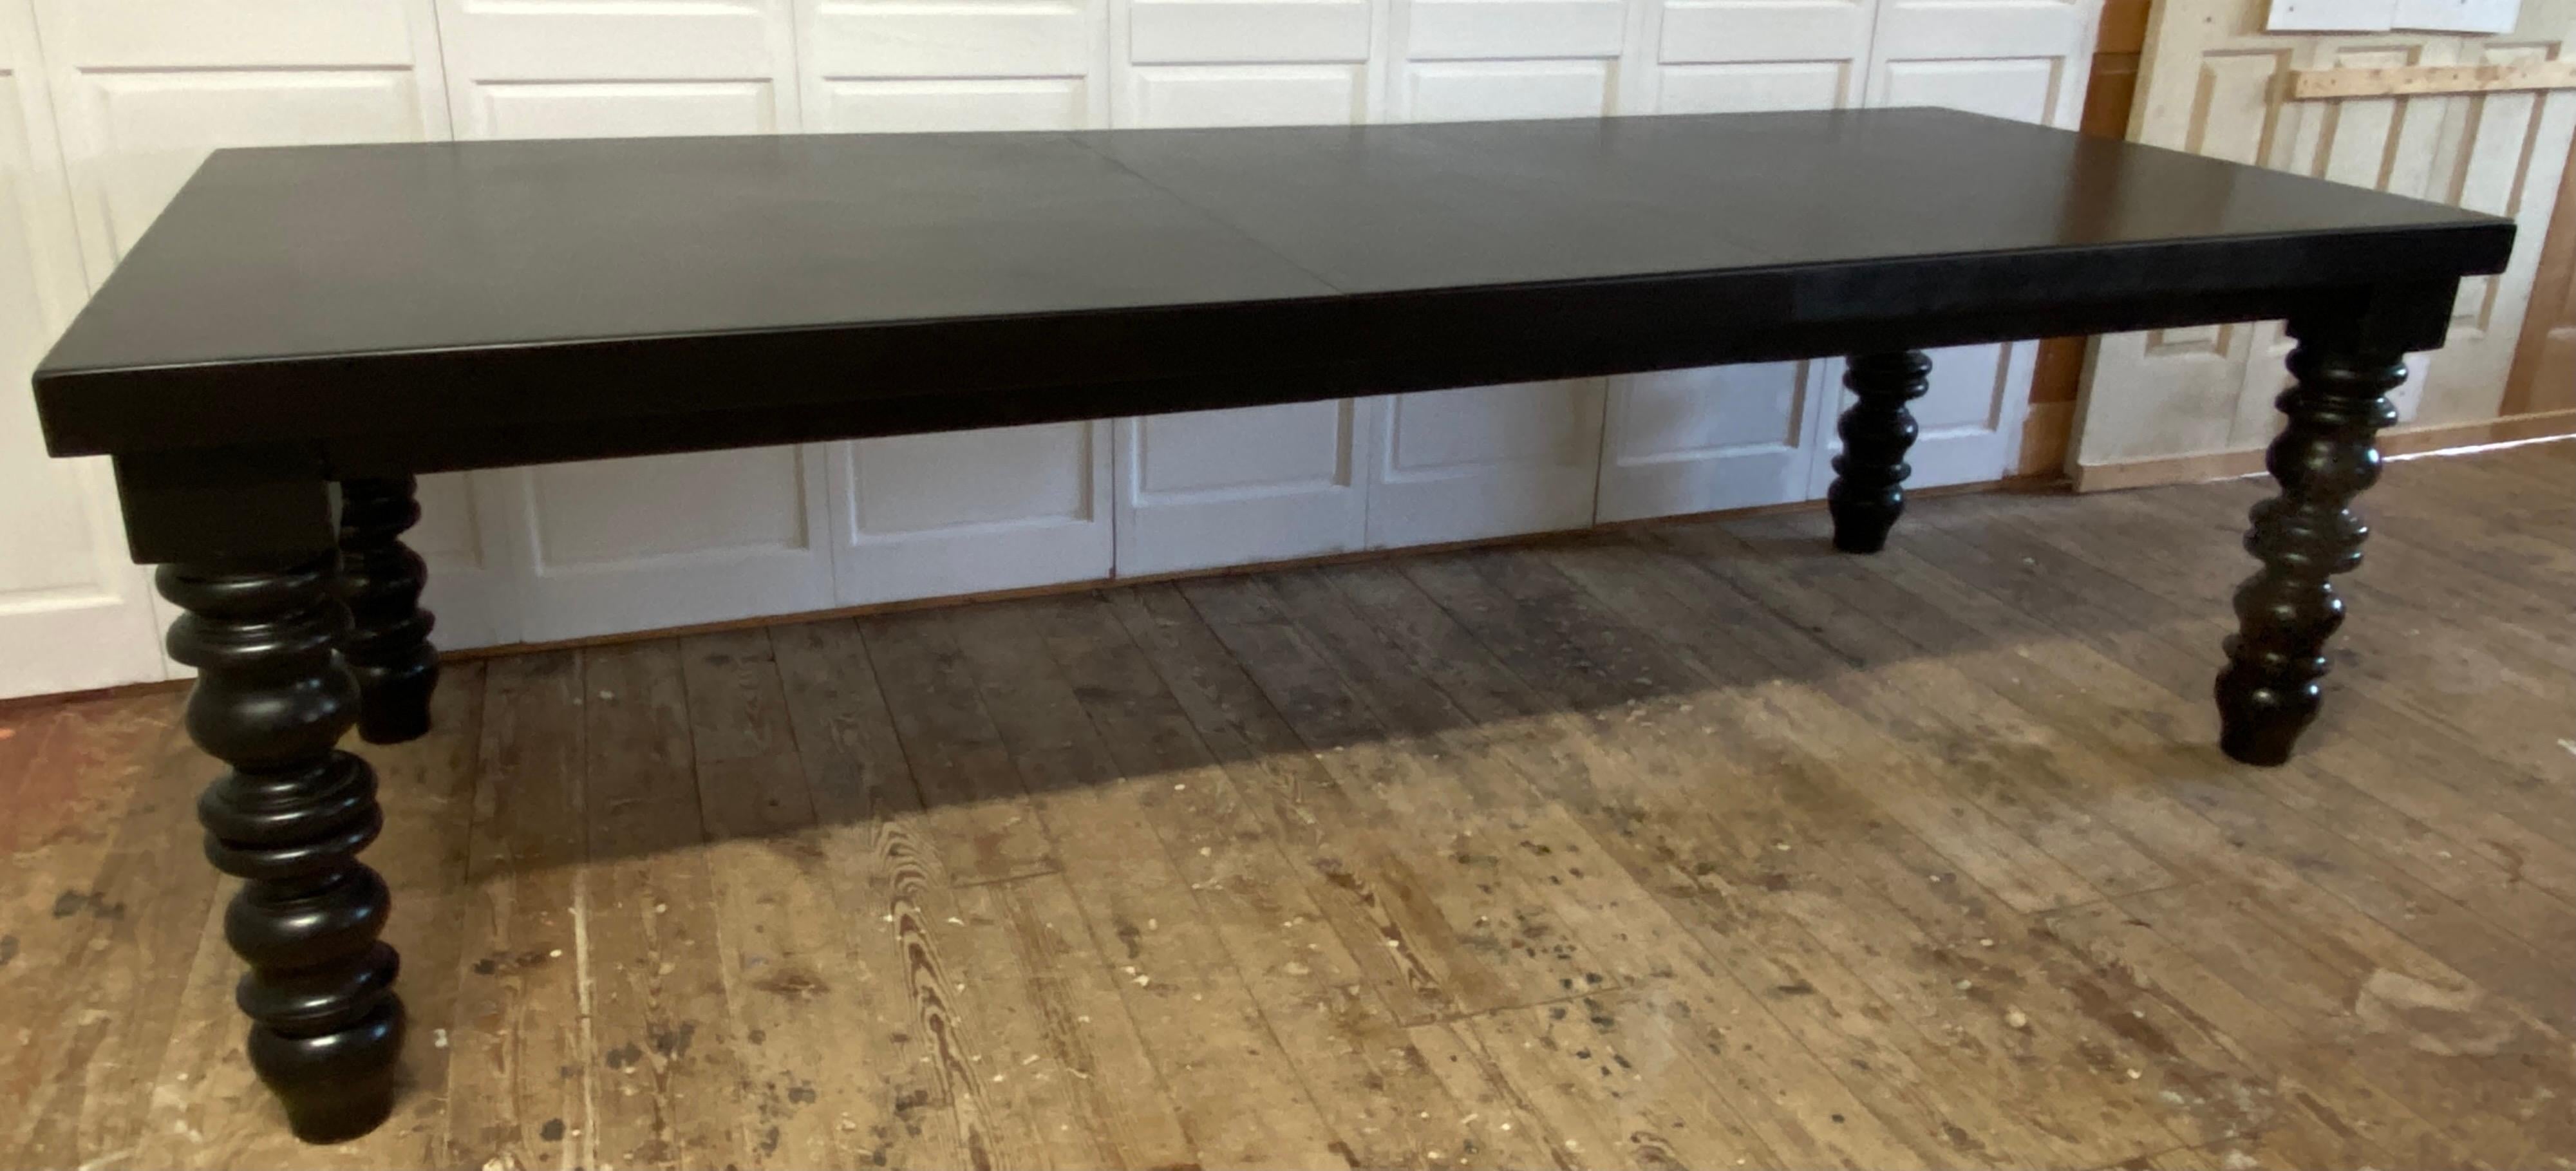 Drexel Dining Table with Oversize Turned Legs For Sale 1